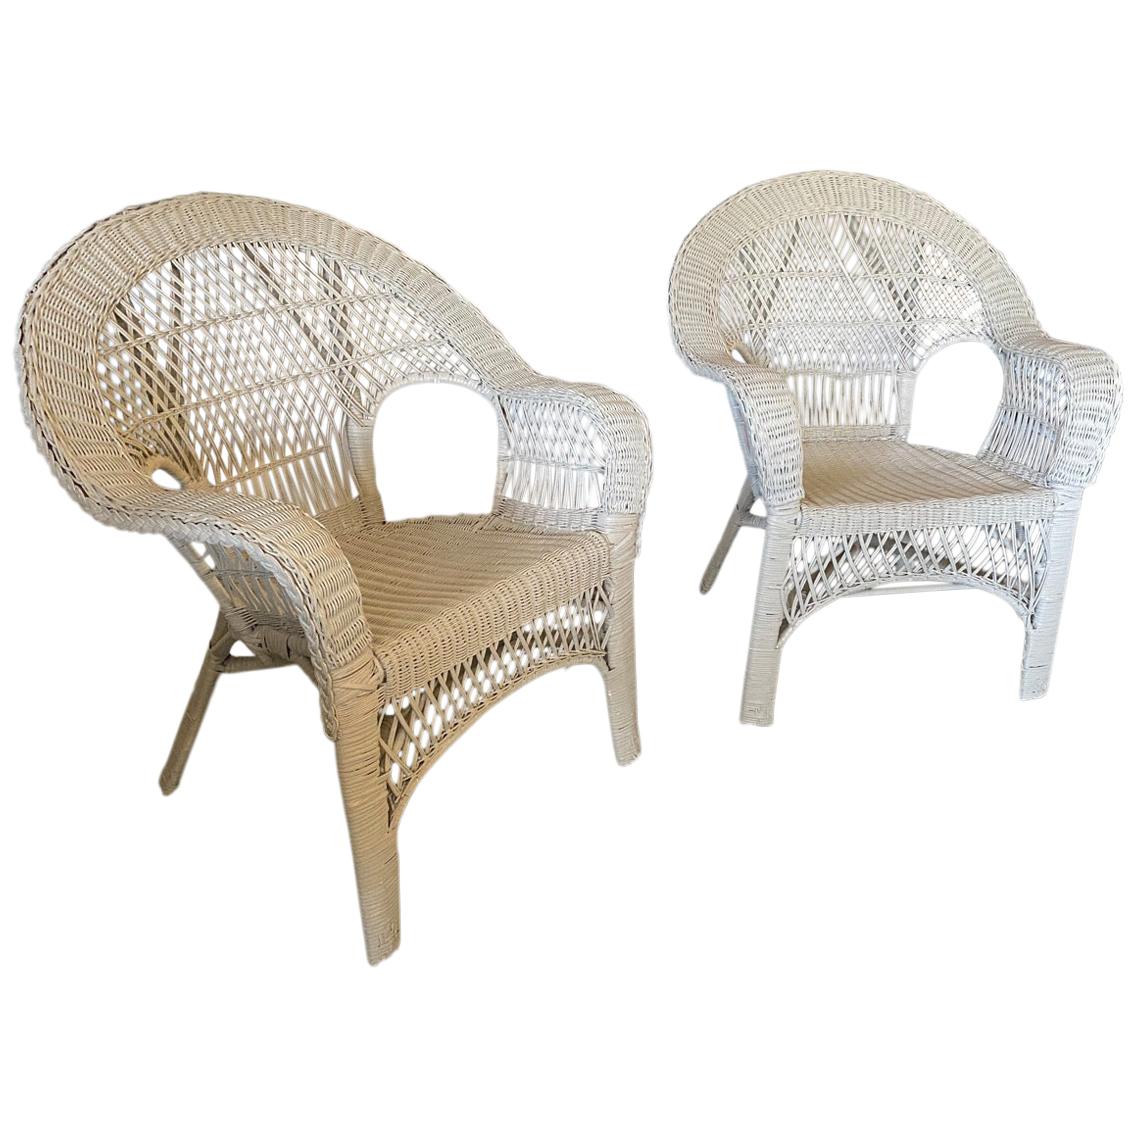 Pair of Victorian Style Wicker Wide Arm Armchair